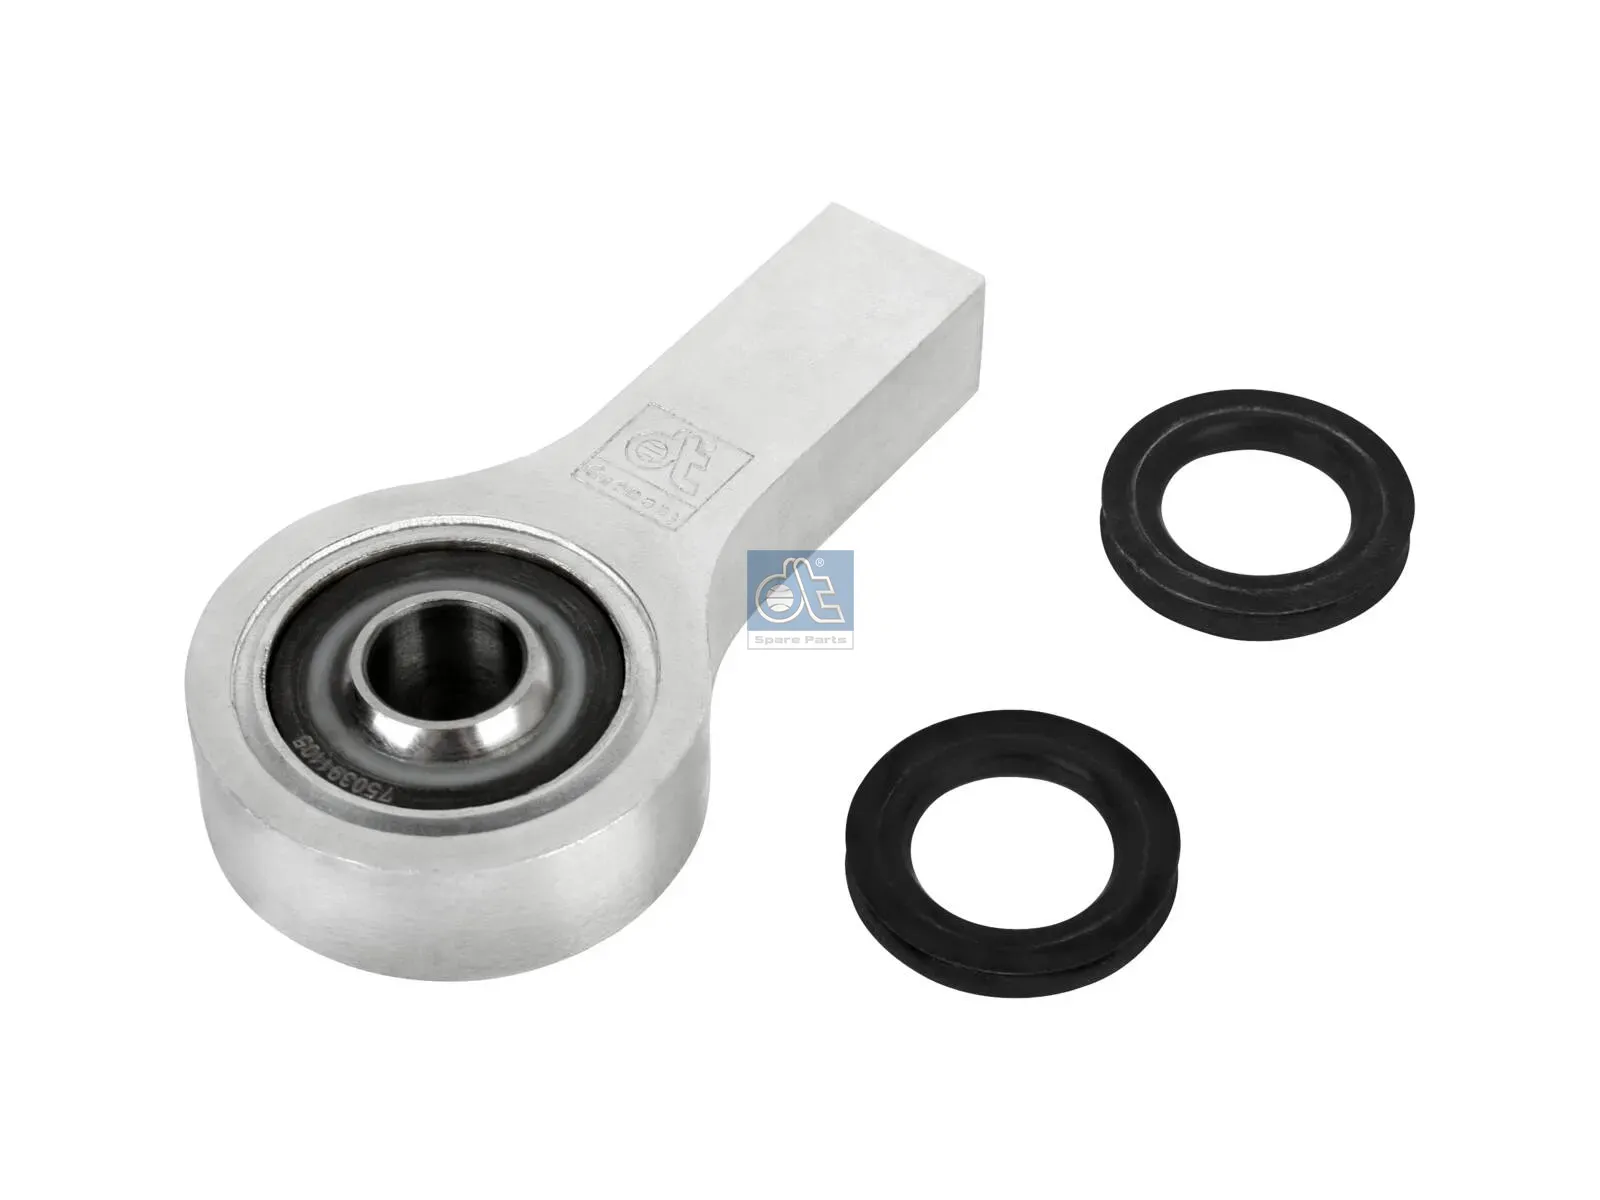 Bearing joint, complete with seal rings